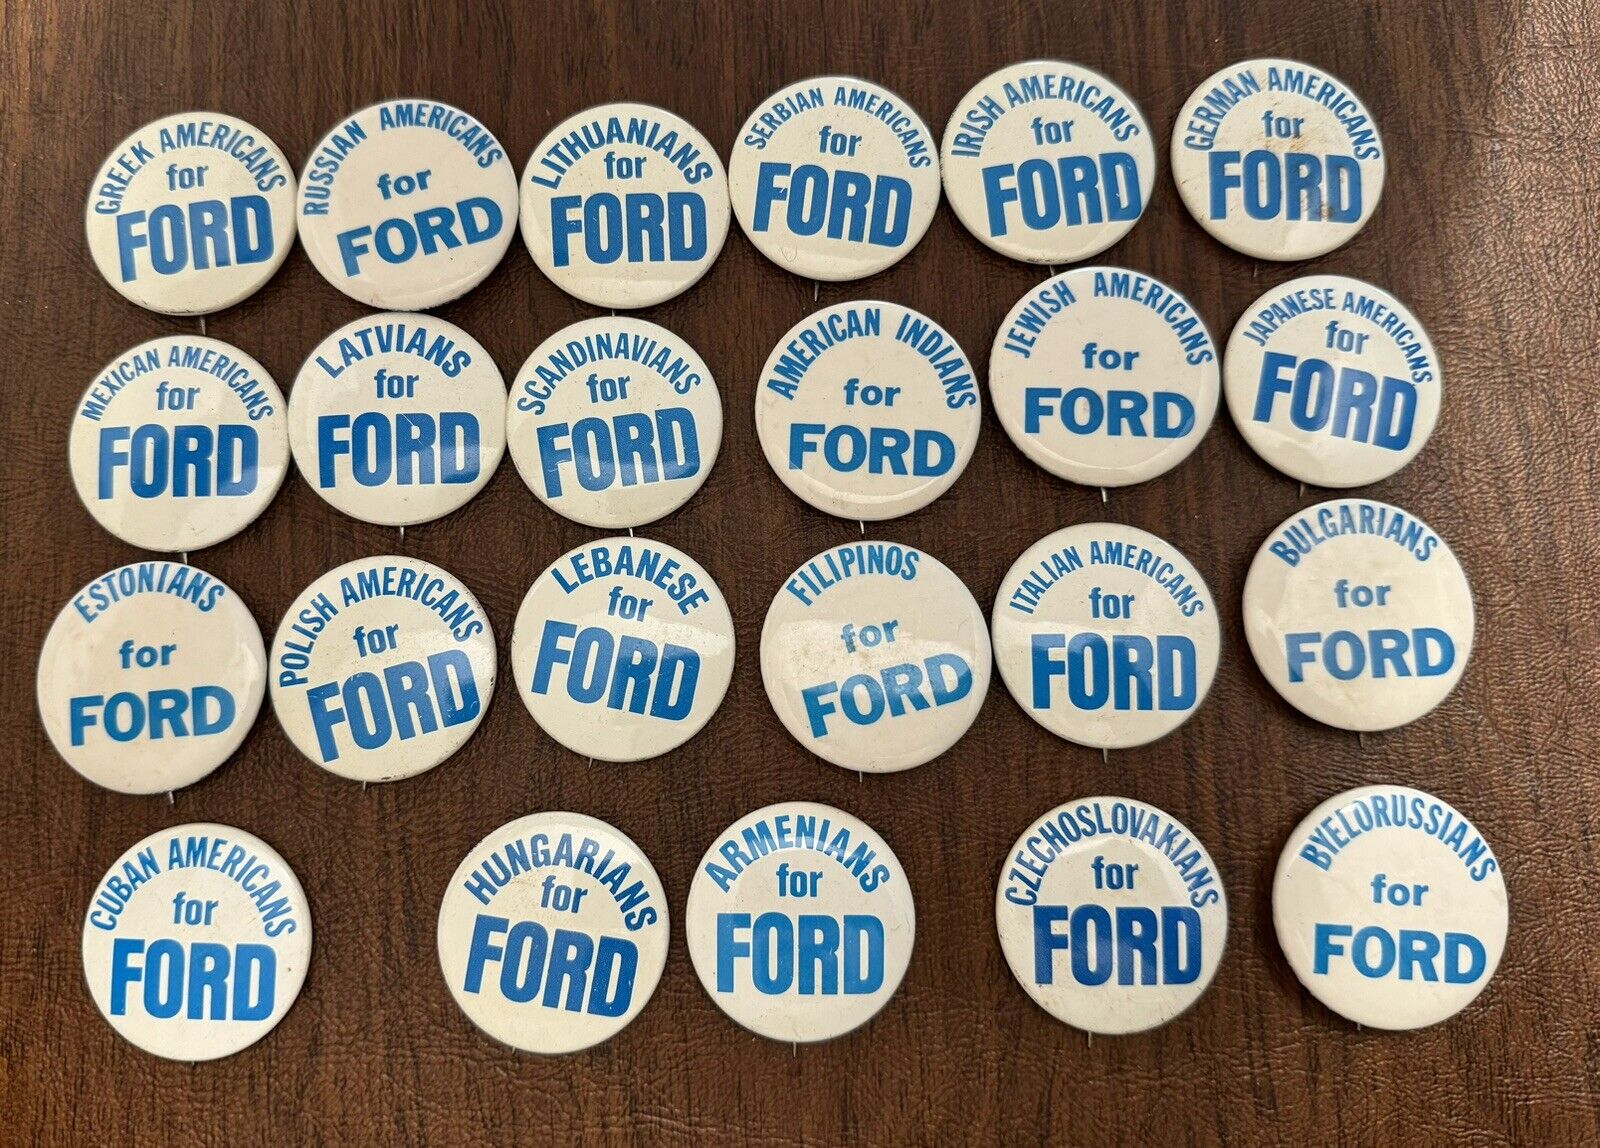 VINTAGE AMERICANS FOR PRESIDENT GERALD FORD CAMPAIGN BUTTON PIN LOT 1976